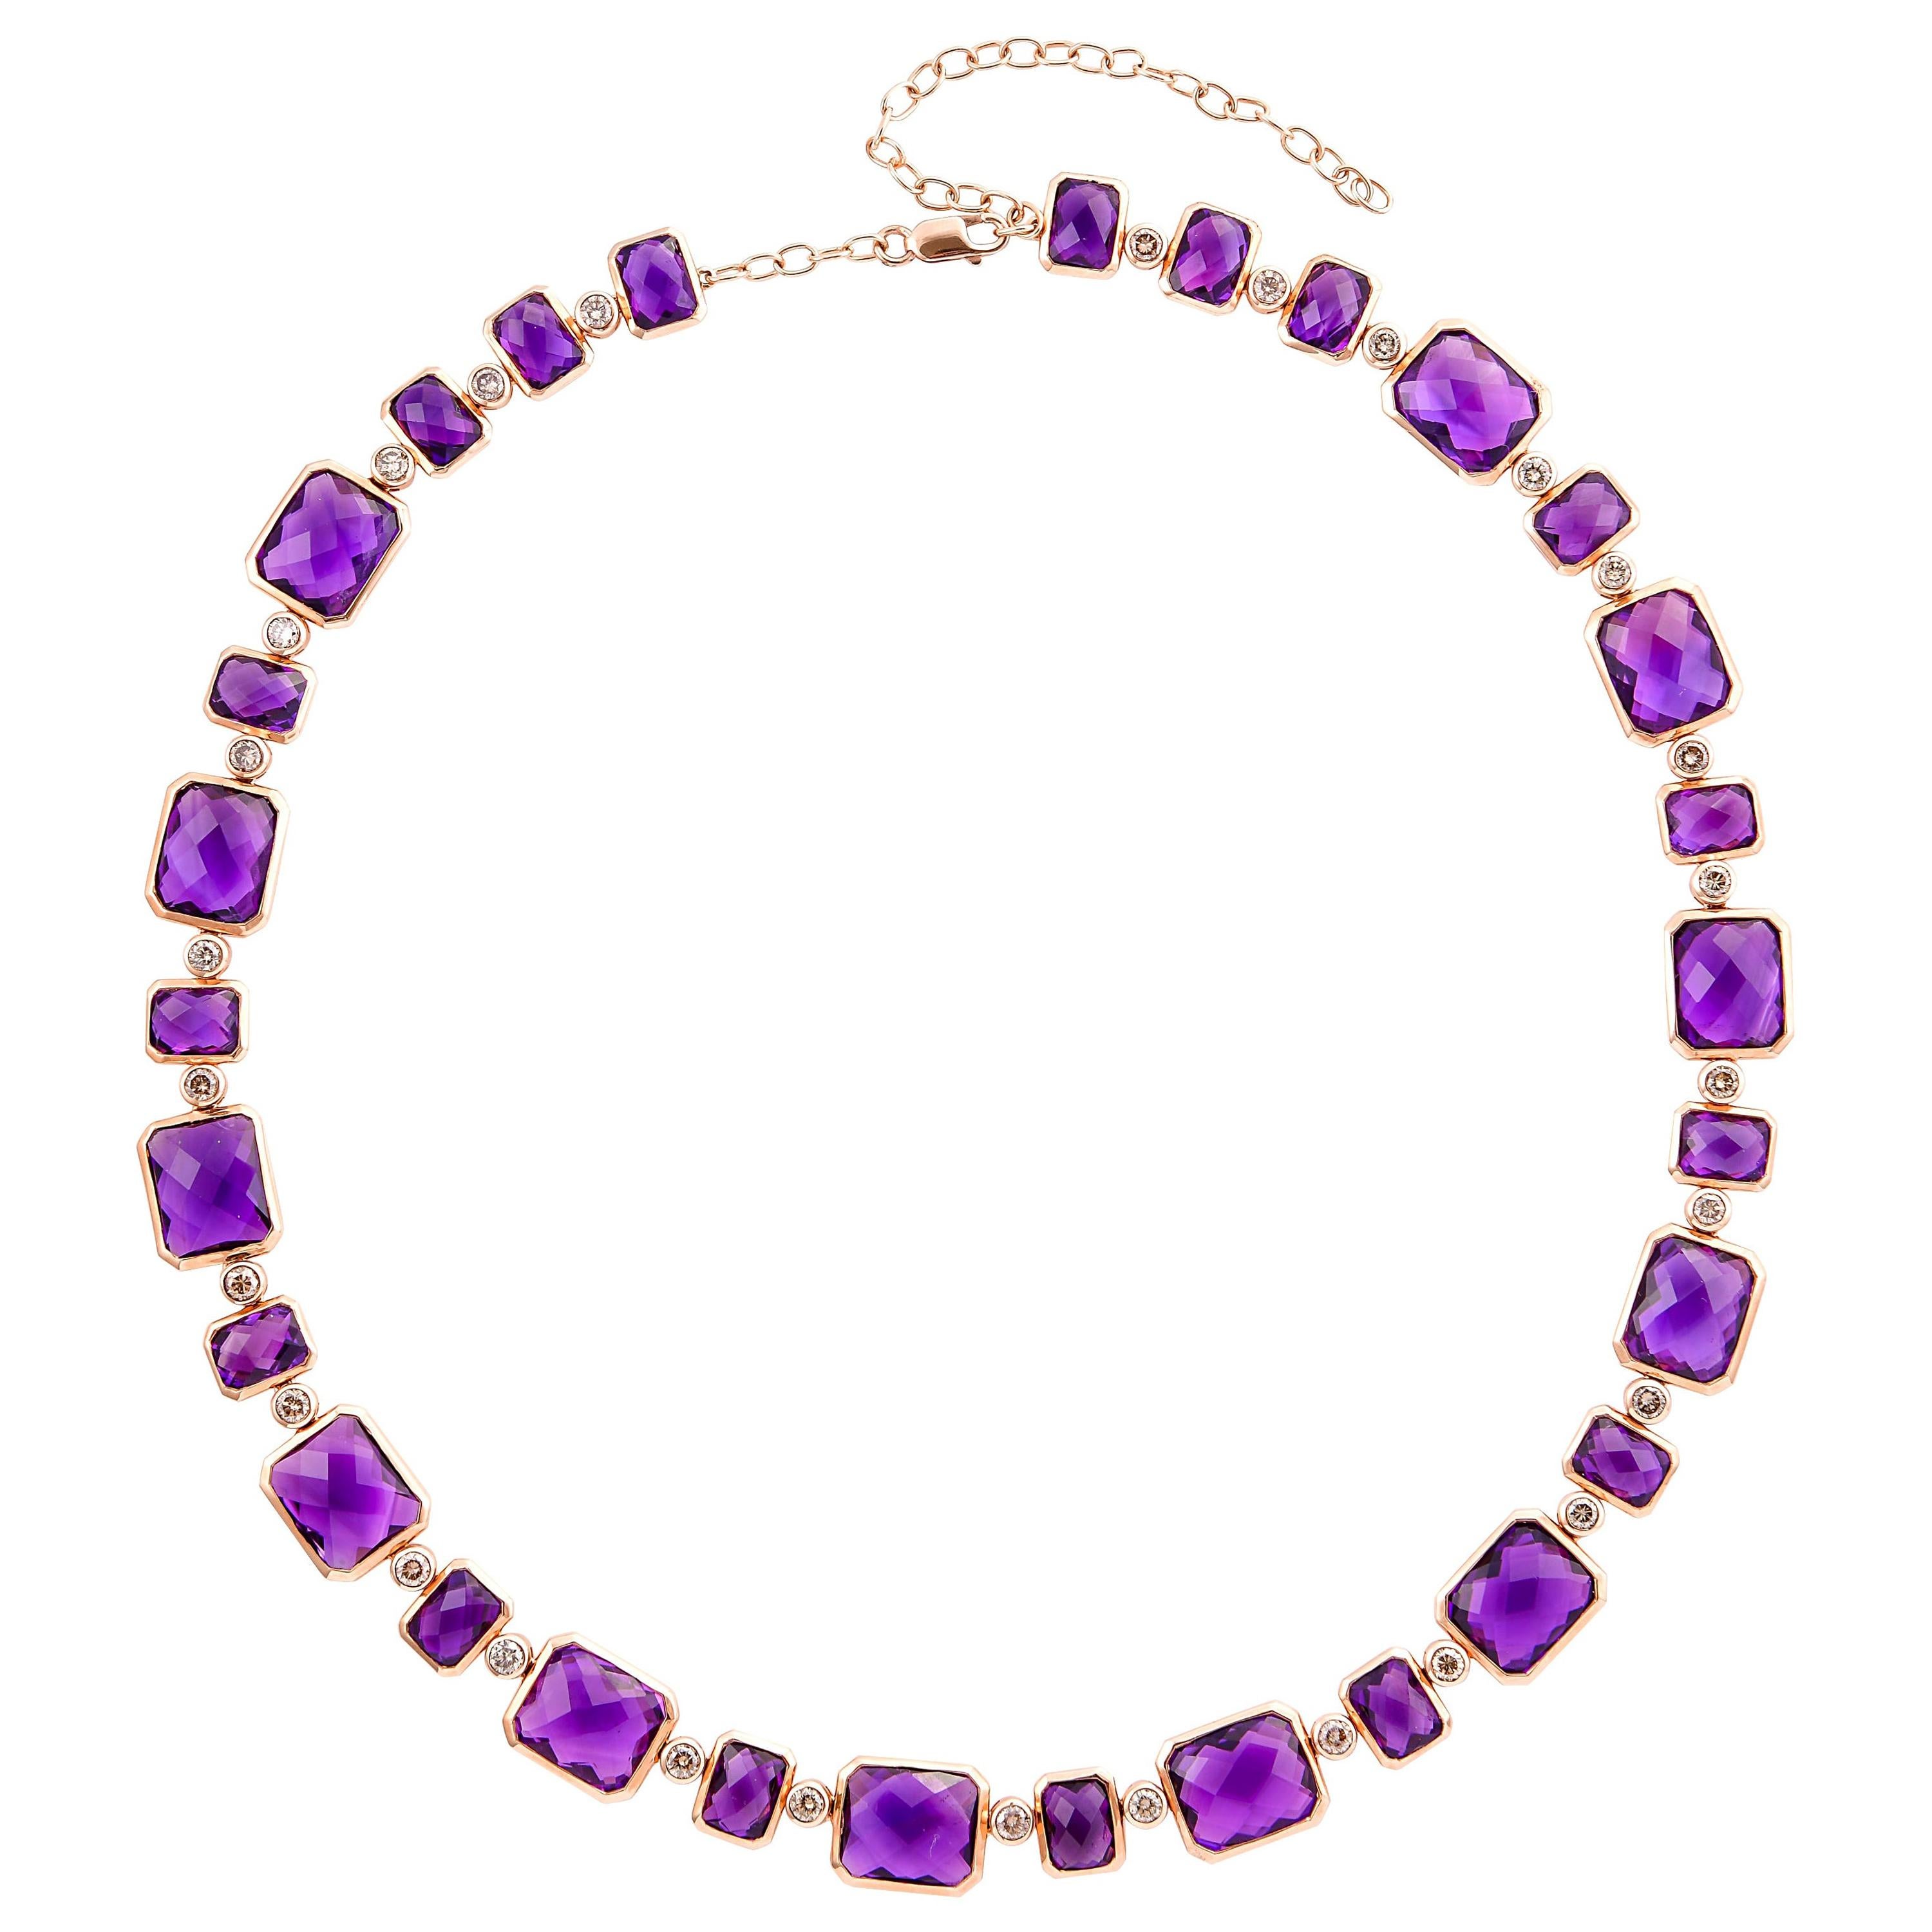 87.12 Carat Amethyst Necklace in 18 Karat Rose Gold with Diamonds For Sale